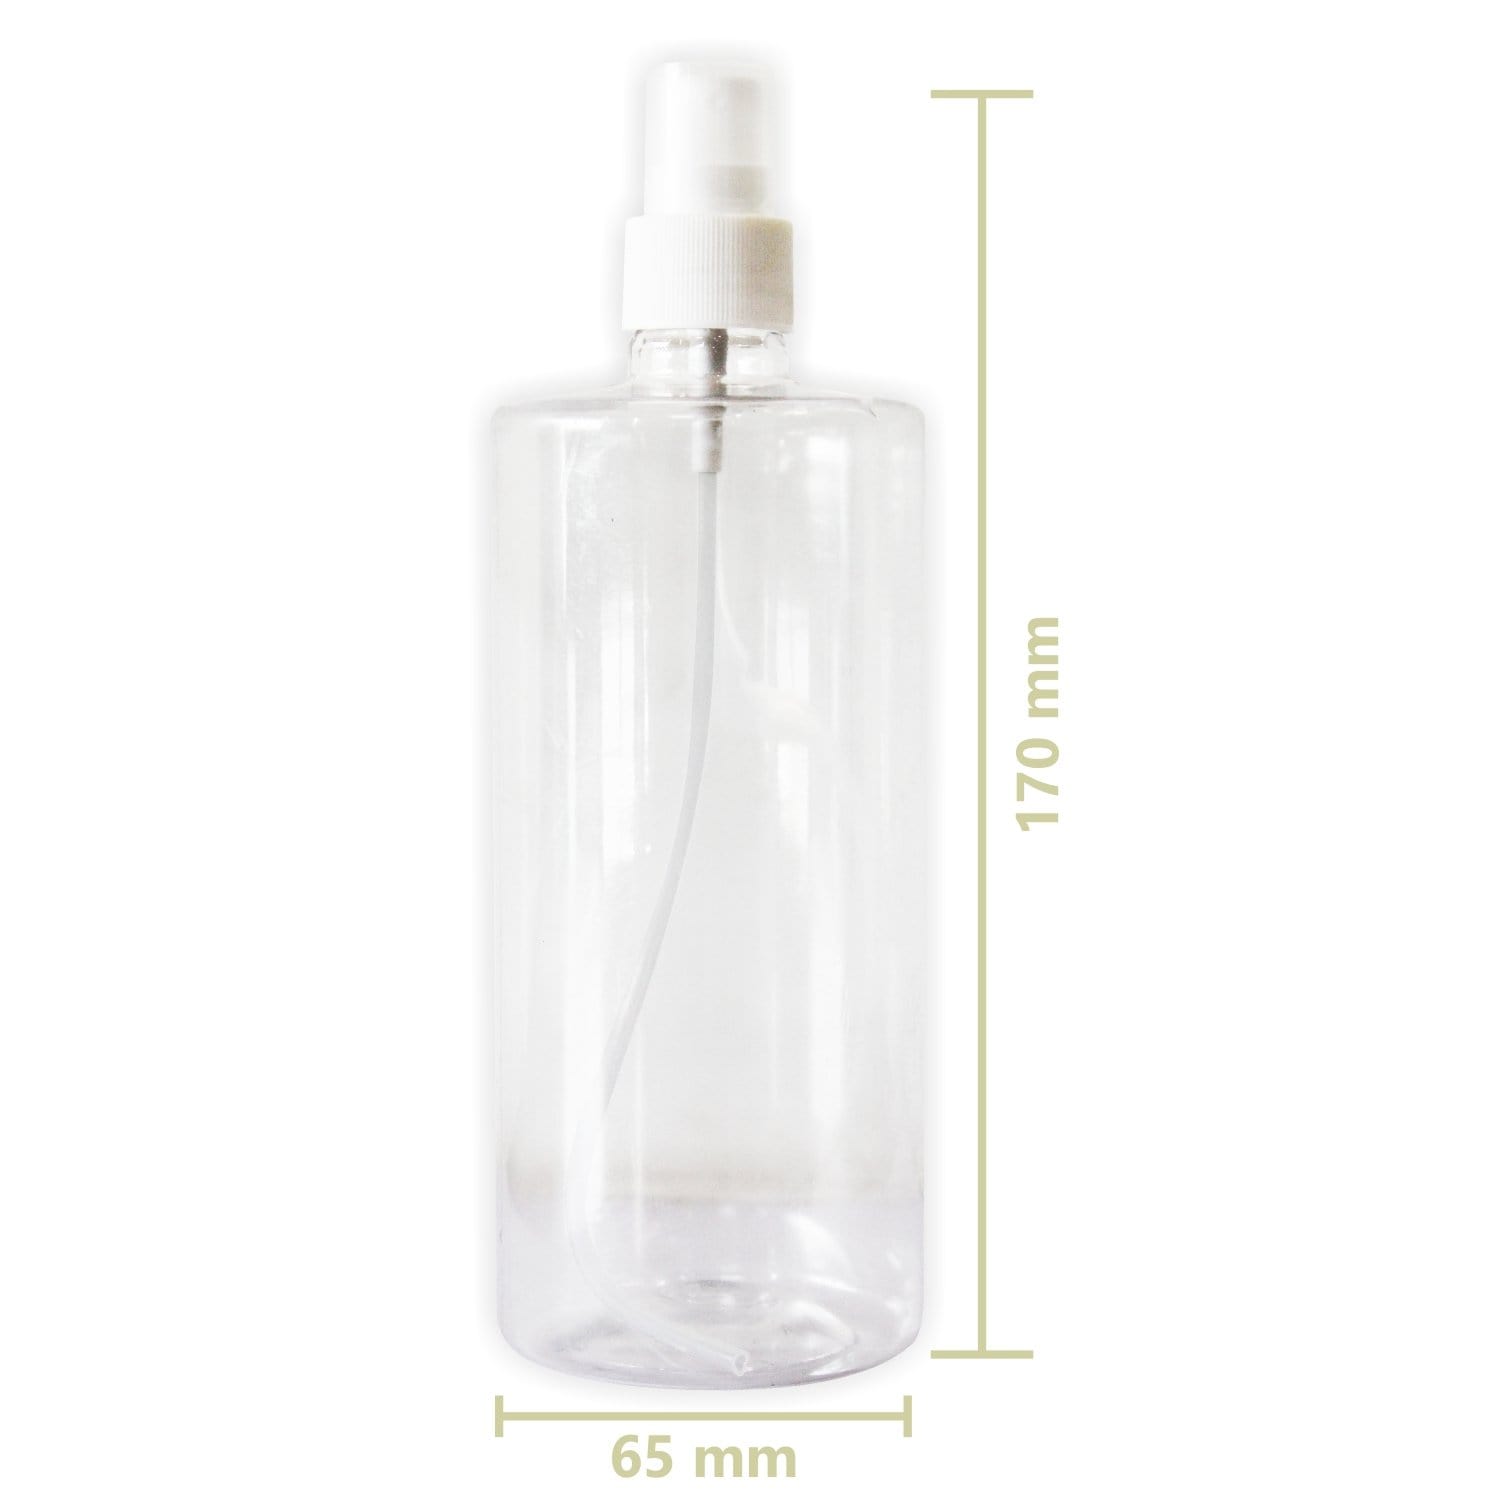 shoprythmindia Packaging,Plastic Travel Bottles Pack of 6 Transparent Mist Spray Bottle Best Used For Sanitizer Refillable Reusable Cosmetic Containers For Lotion Shampoo Massage Oils Outdoor Camping Travel